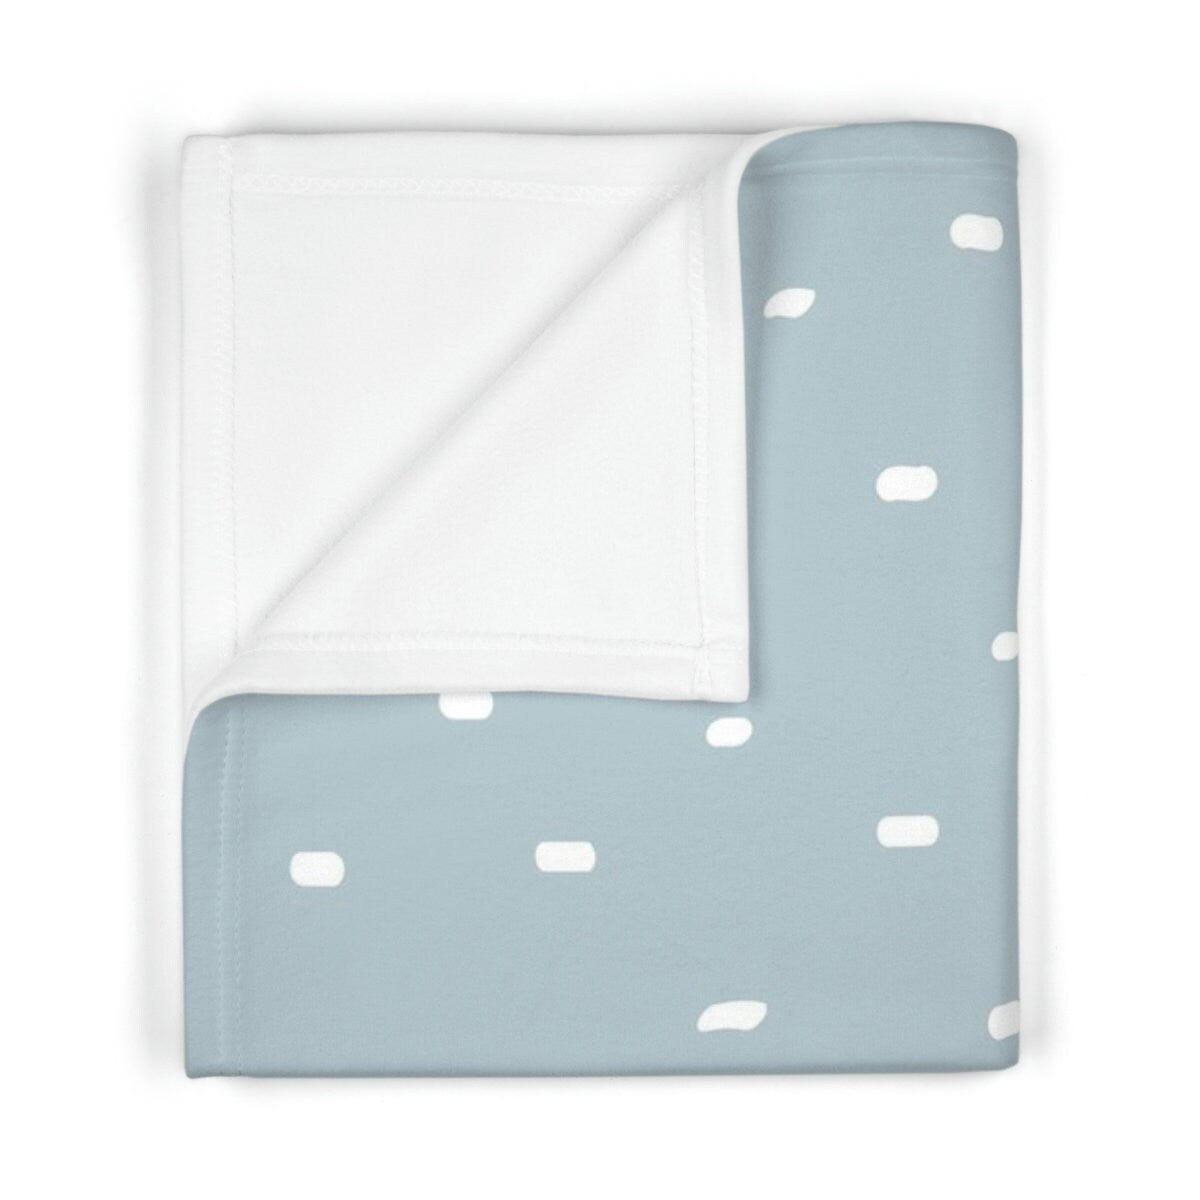 Adorable soft fleece baby blanket, baby shower gift, favorite baby blanket, choice of designs